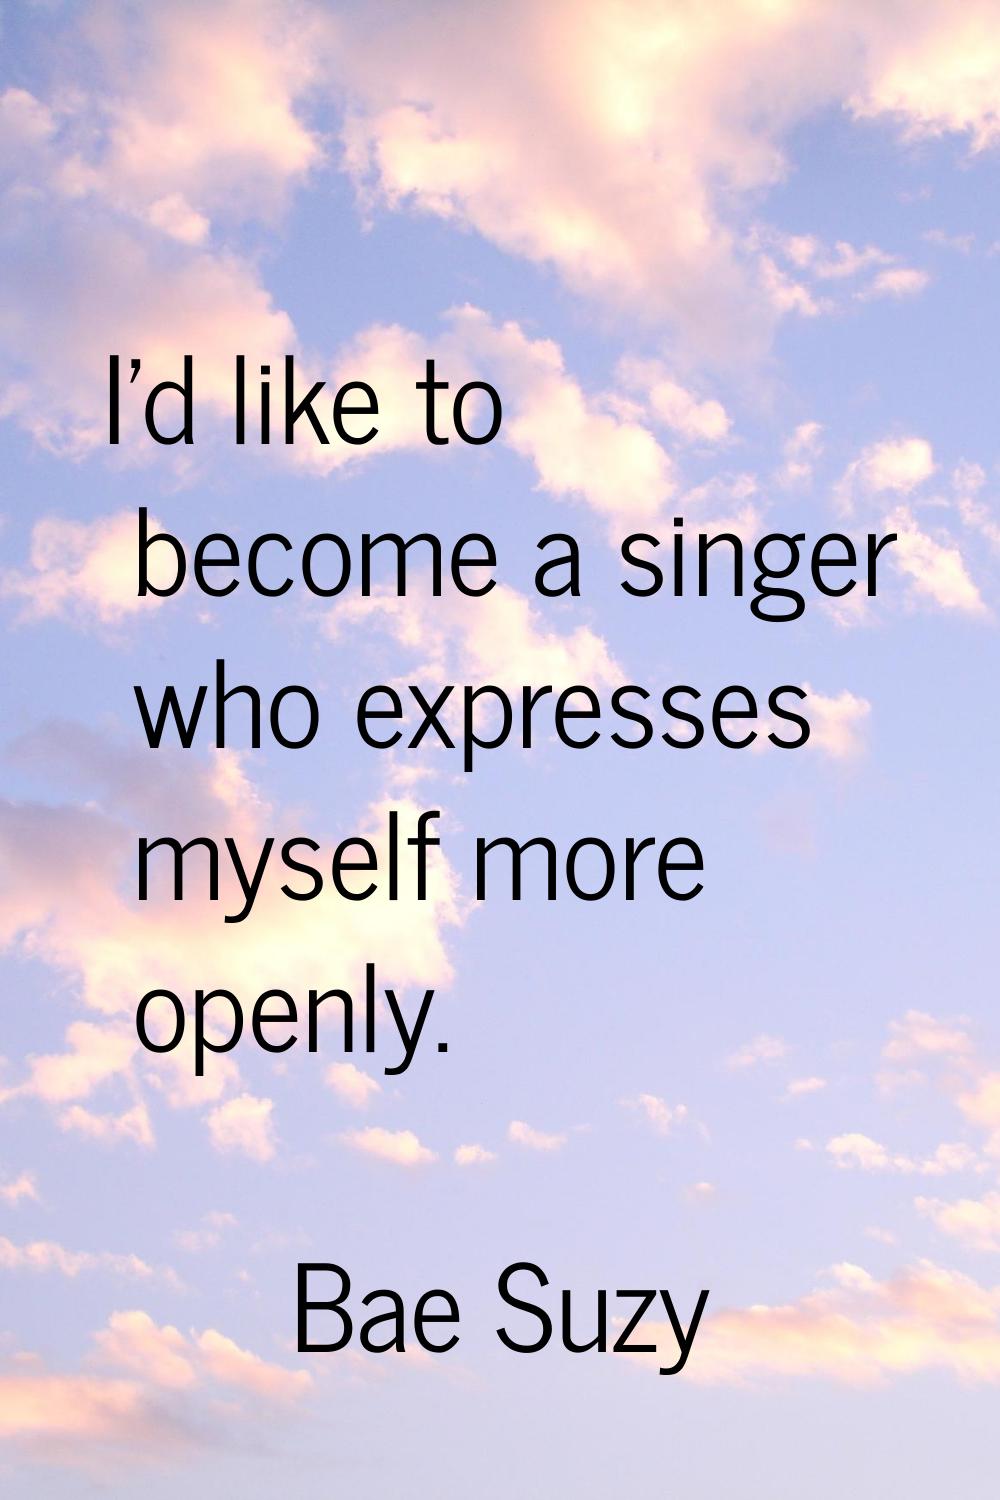 I'd like to become a singer who expresses myself more openly.